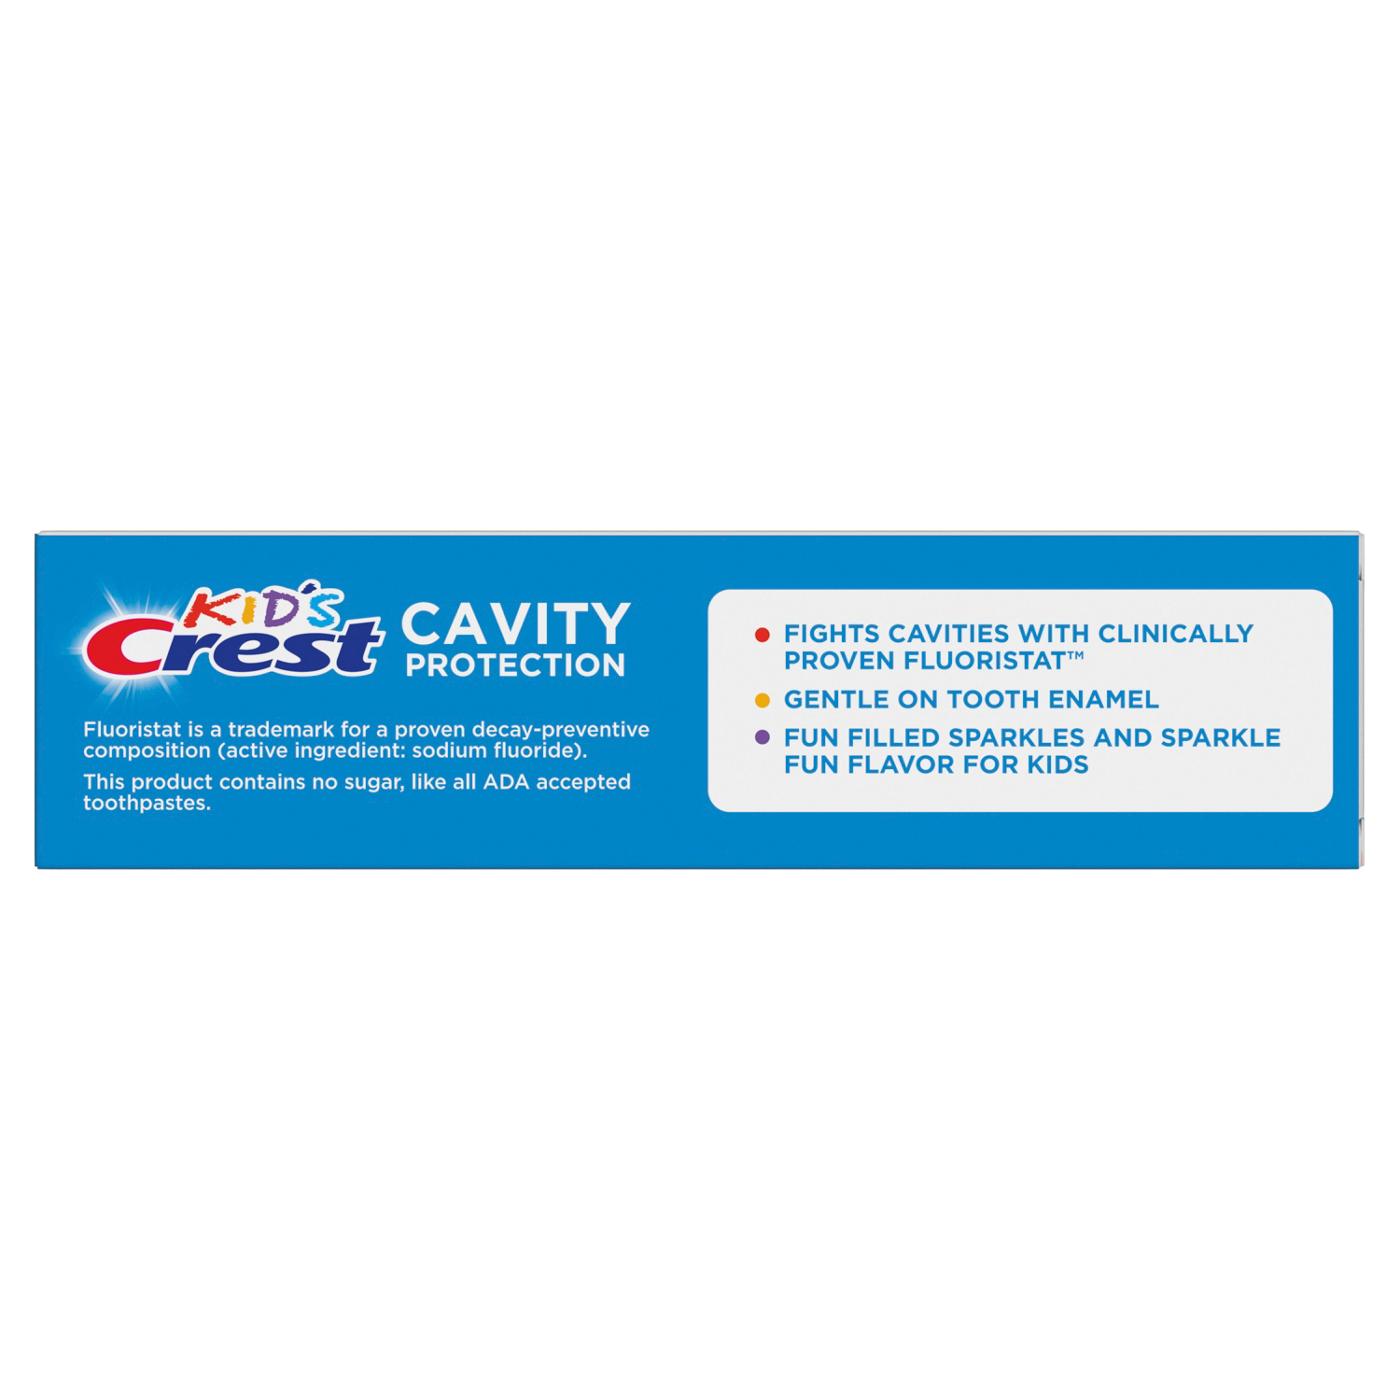 Crest Kid's Cavity Protection Toothpaste - Sparkle Fun; image 2 of 8